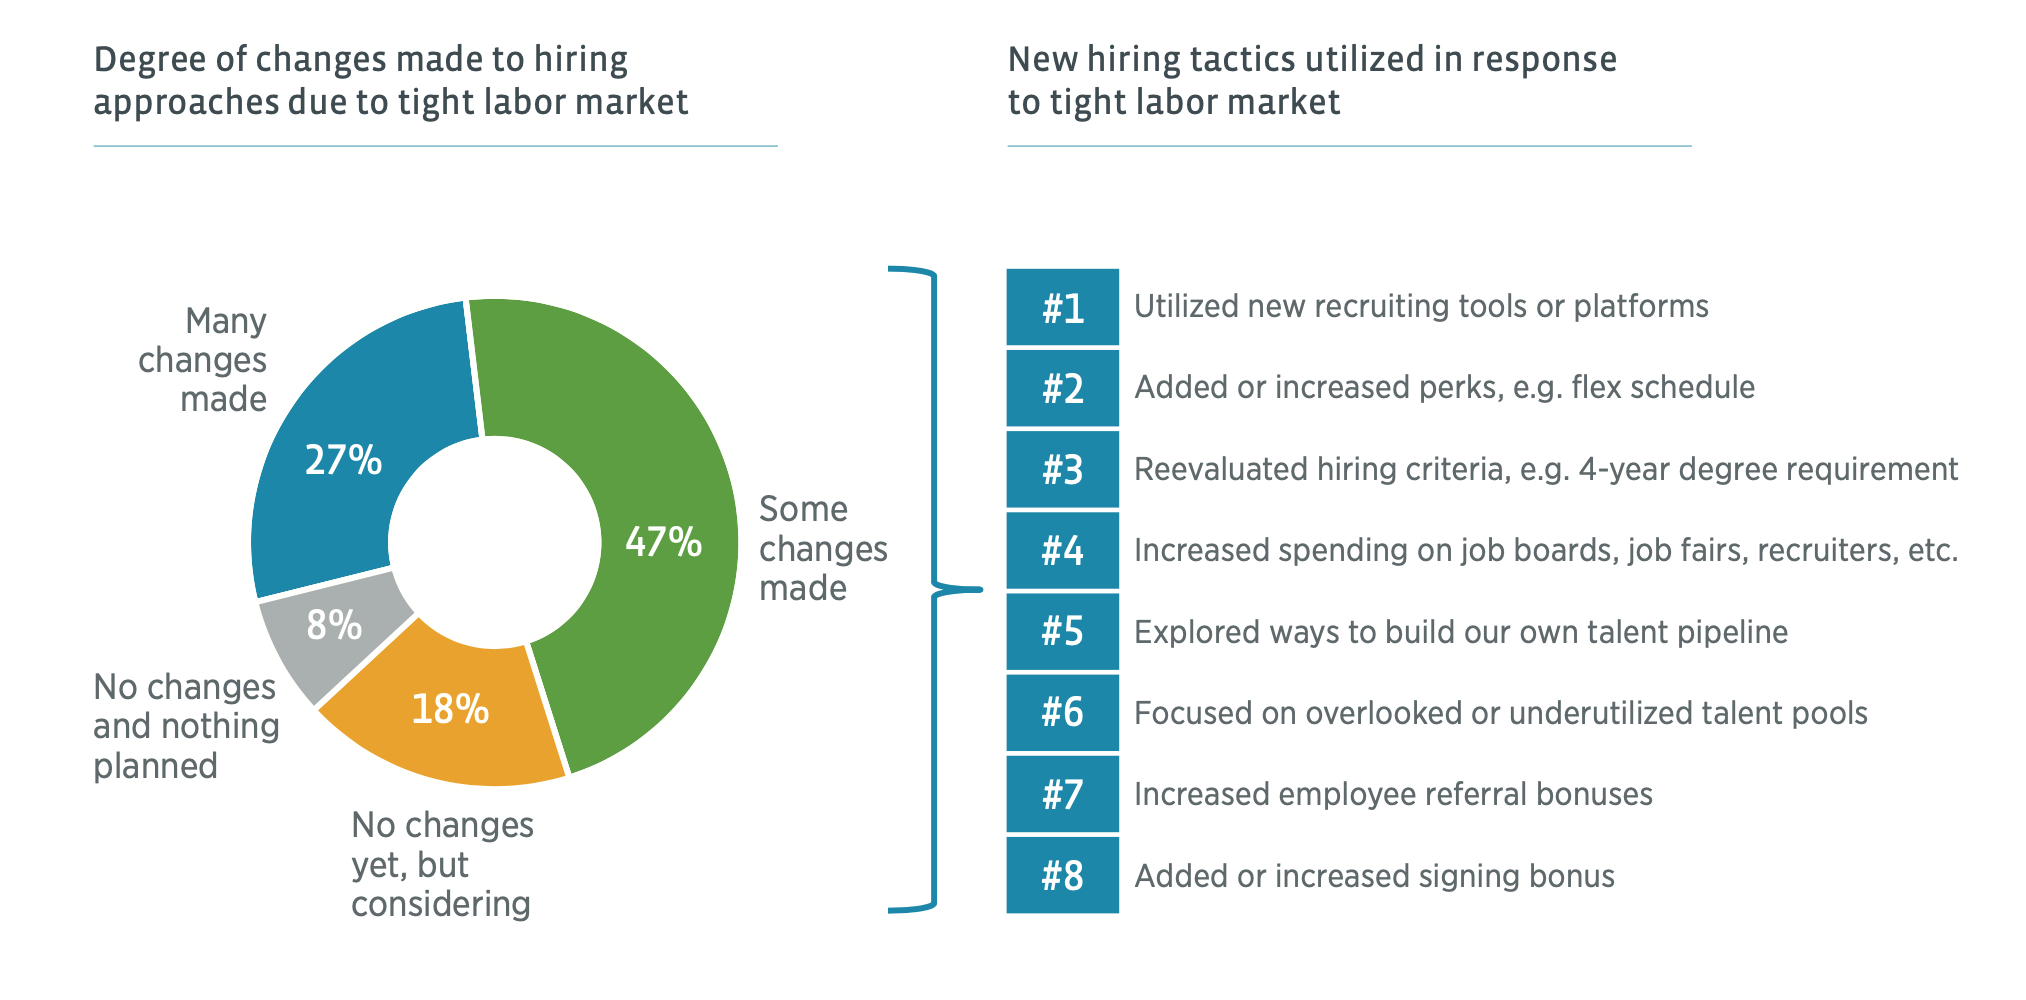 Degree of changes made to hiring approaches due to tight labor market